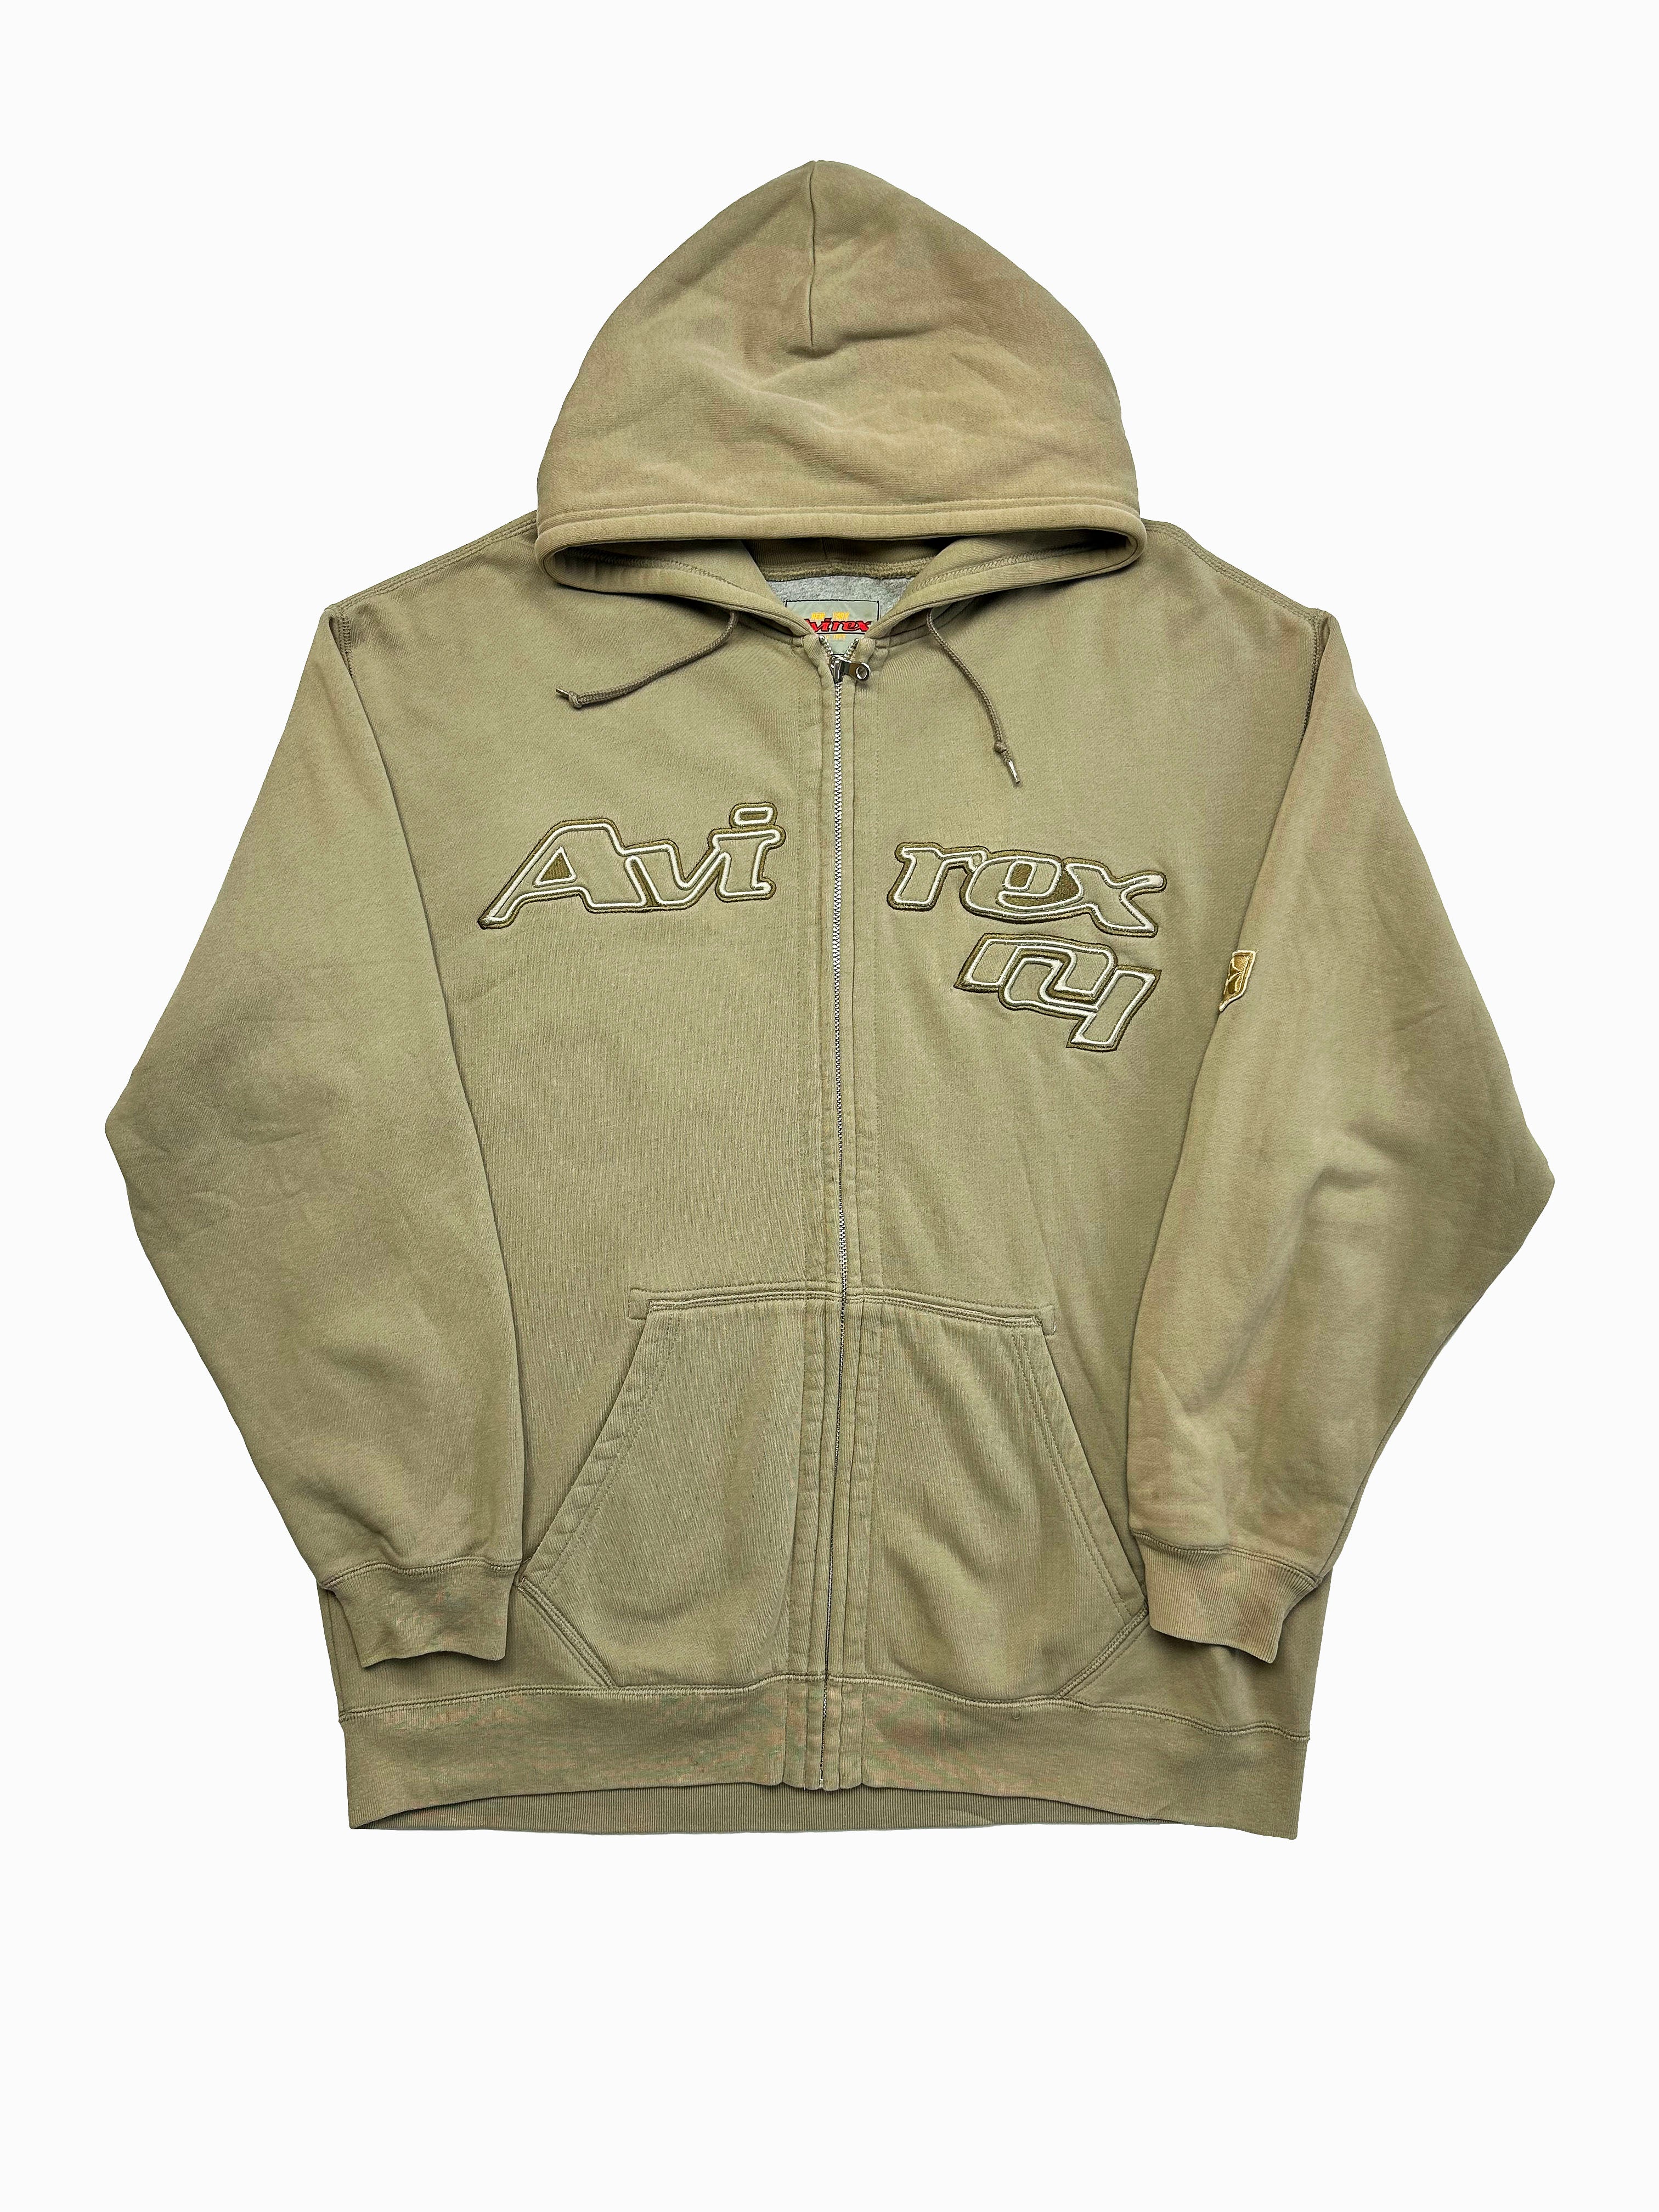 Avirex Khaki Spell Out Hoodie 90’s